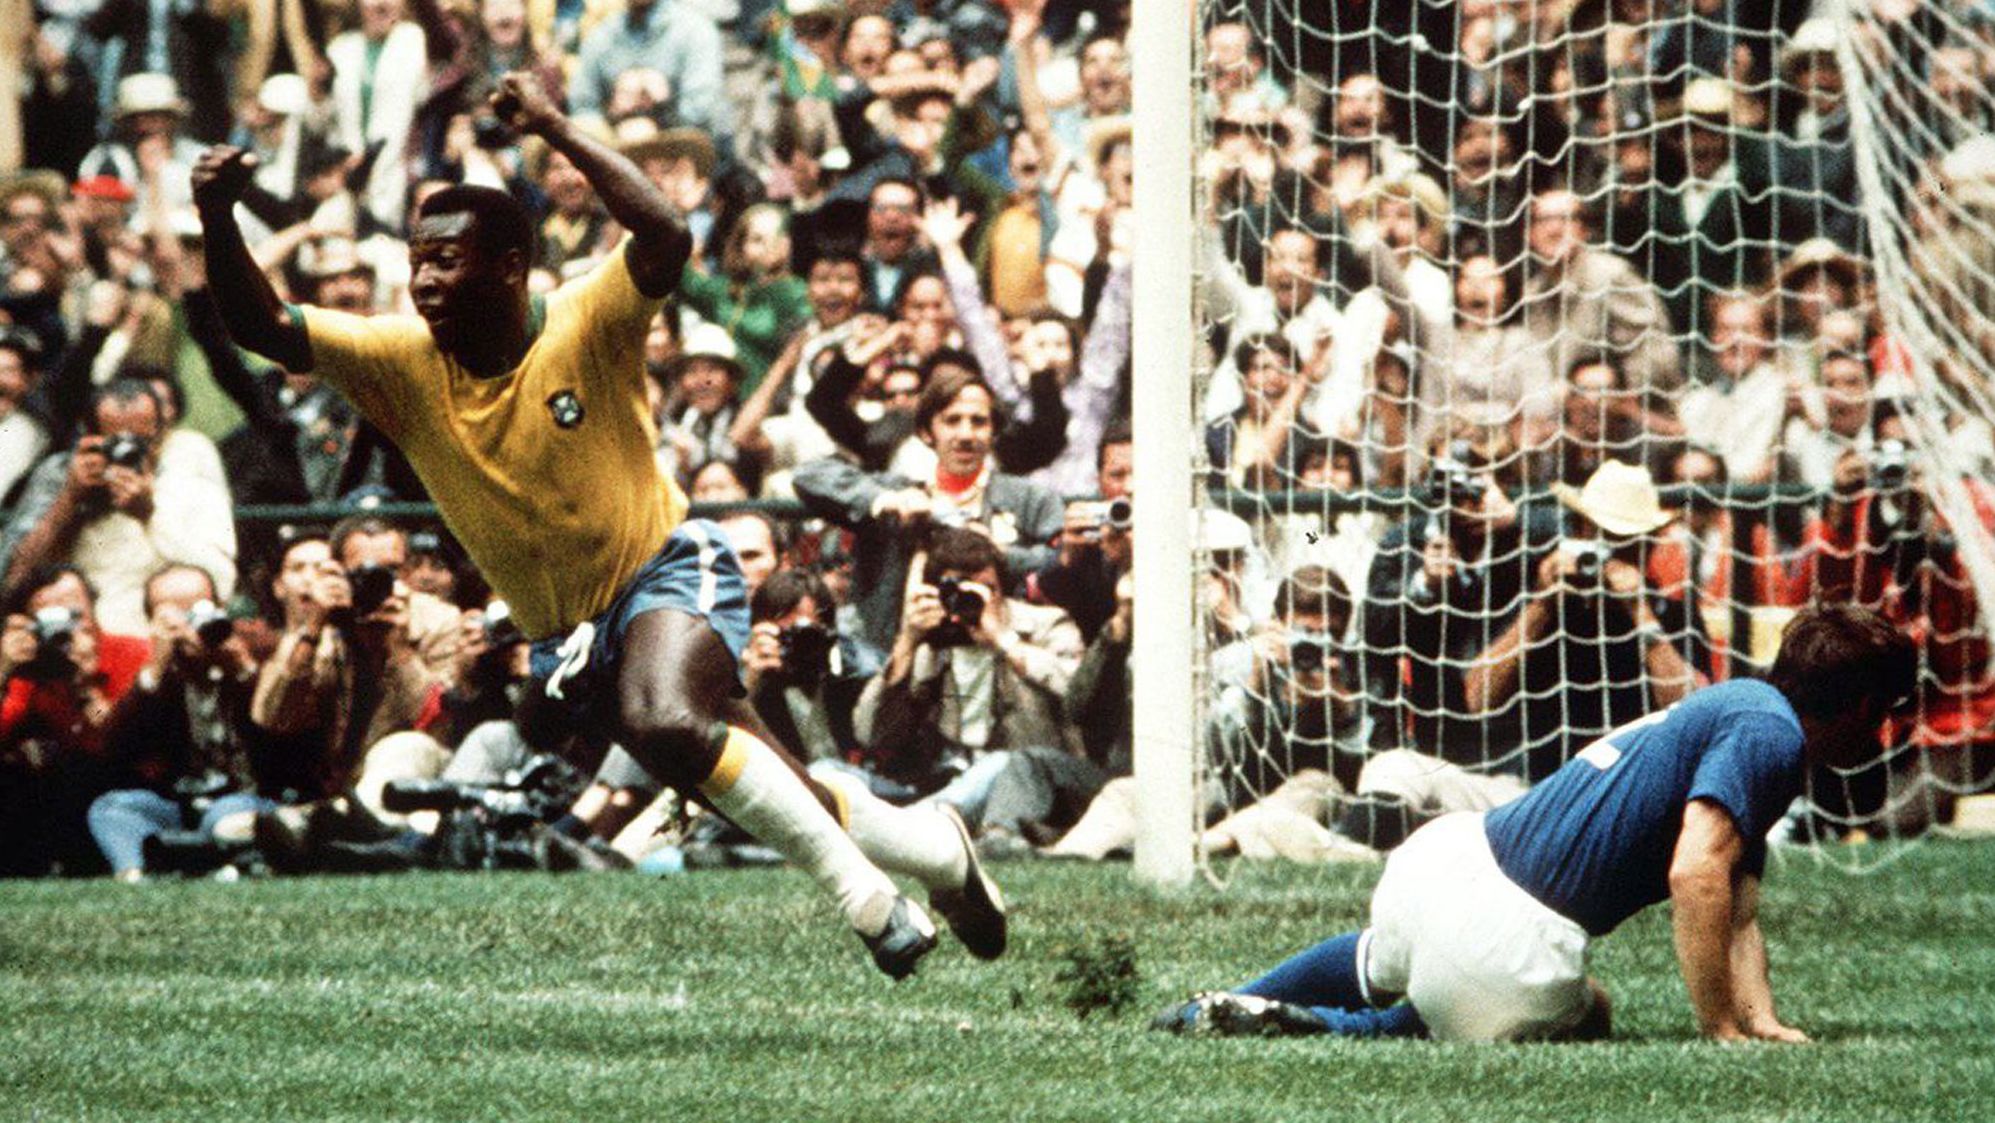 Pelé celebrates after scoring the first goal for Brazil in the 1970 World Cup final against Italy. The Brazilians won 4-1. "Before the match, I told myself that Pelé was just flesh and bones like the rest of us," Italian defender Tarcisio Burgnich said after the match. "Later, I realized I'd been wrong."